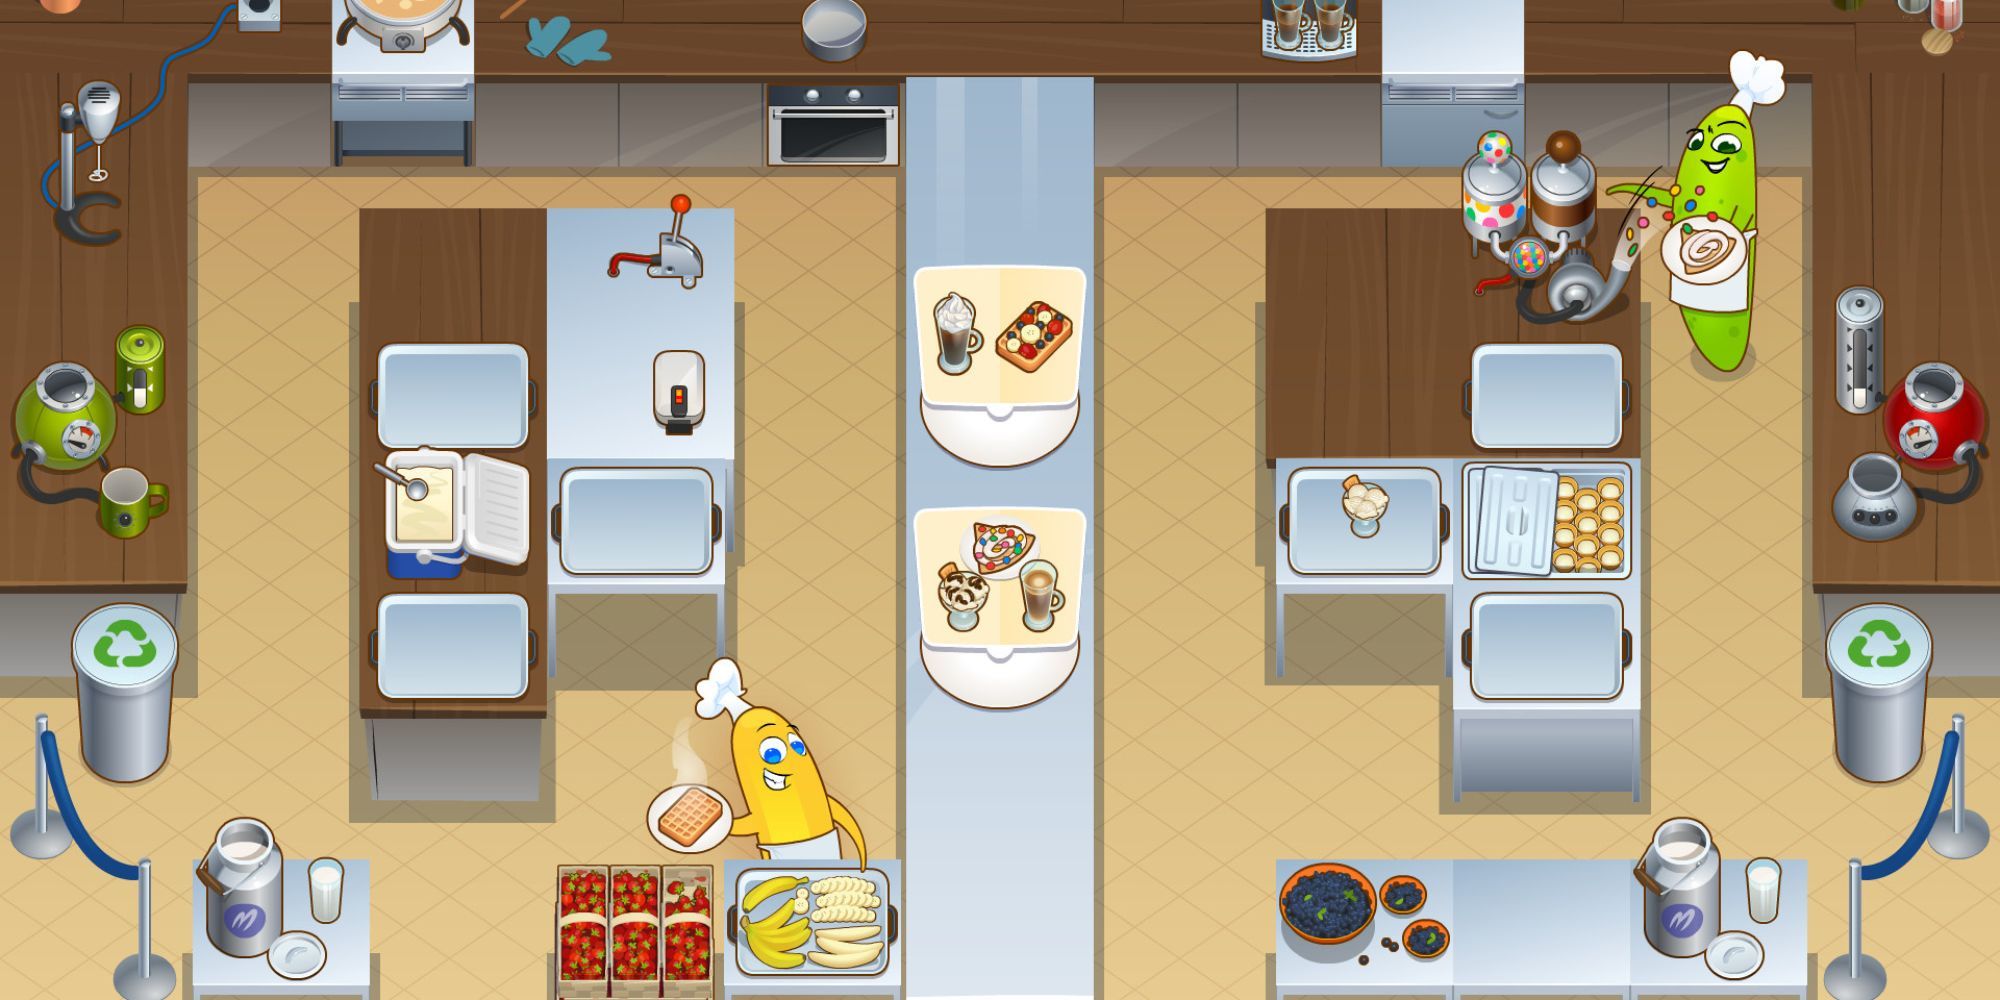 Players cooking in Let’s Cook Together